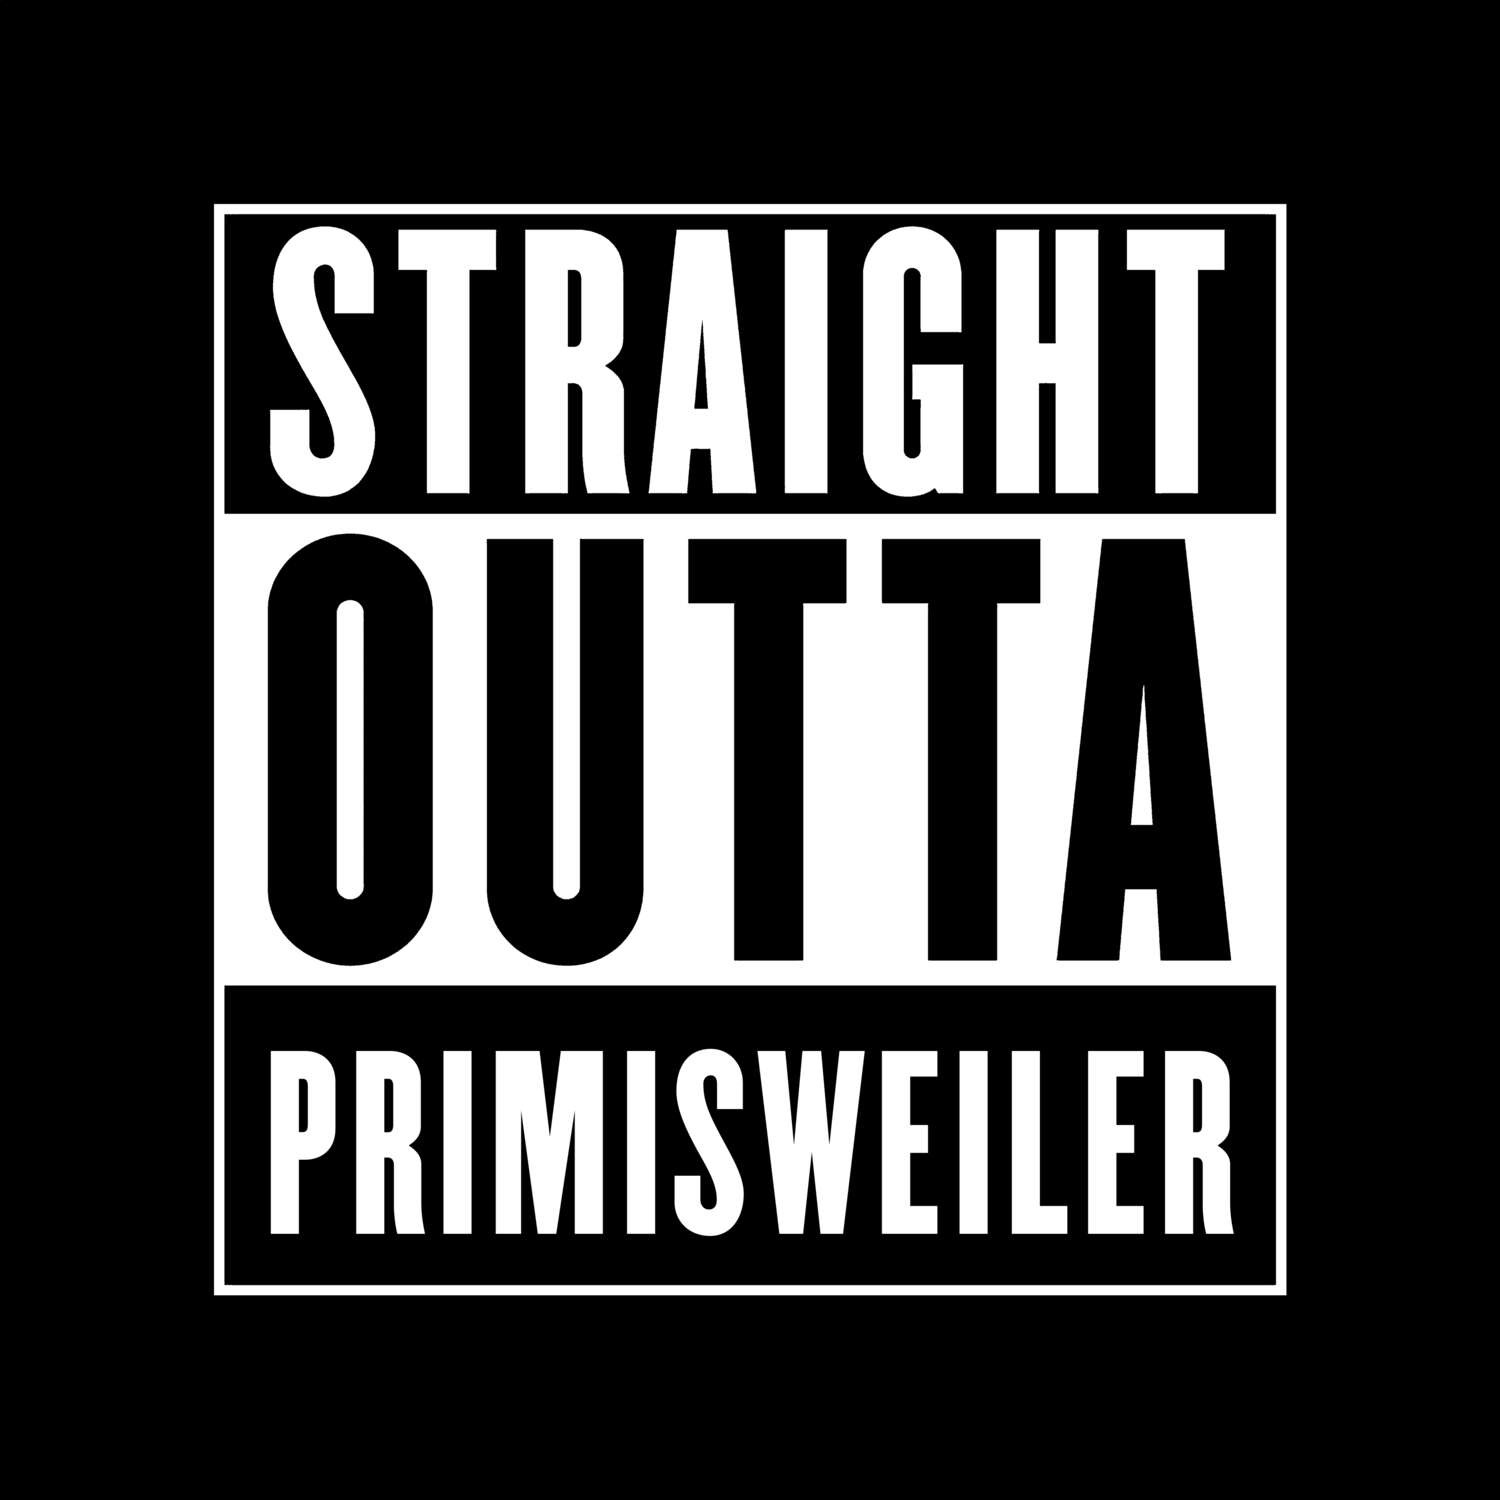 Primisweiler T-Shirt »Straight Outta«